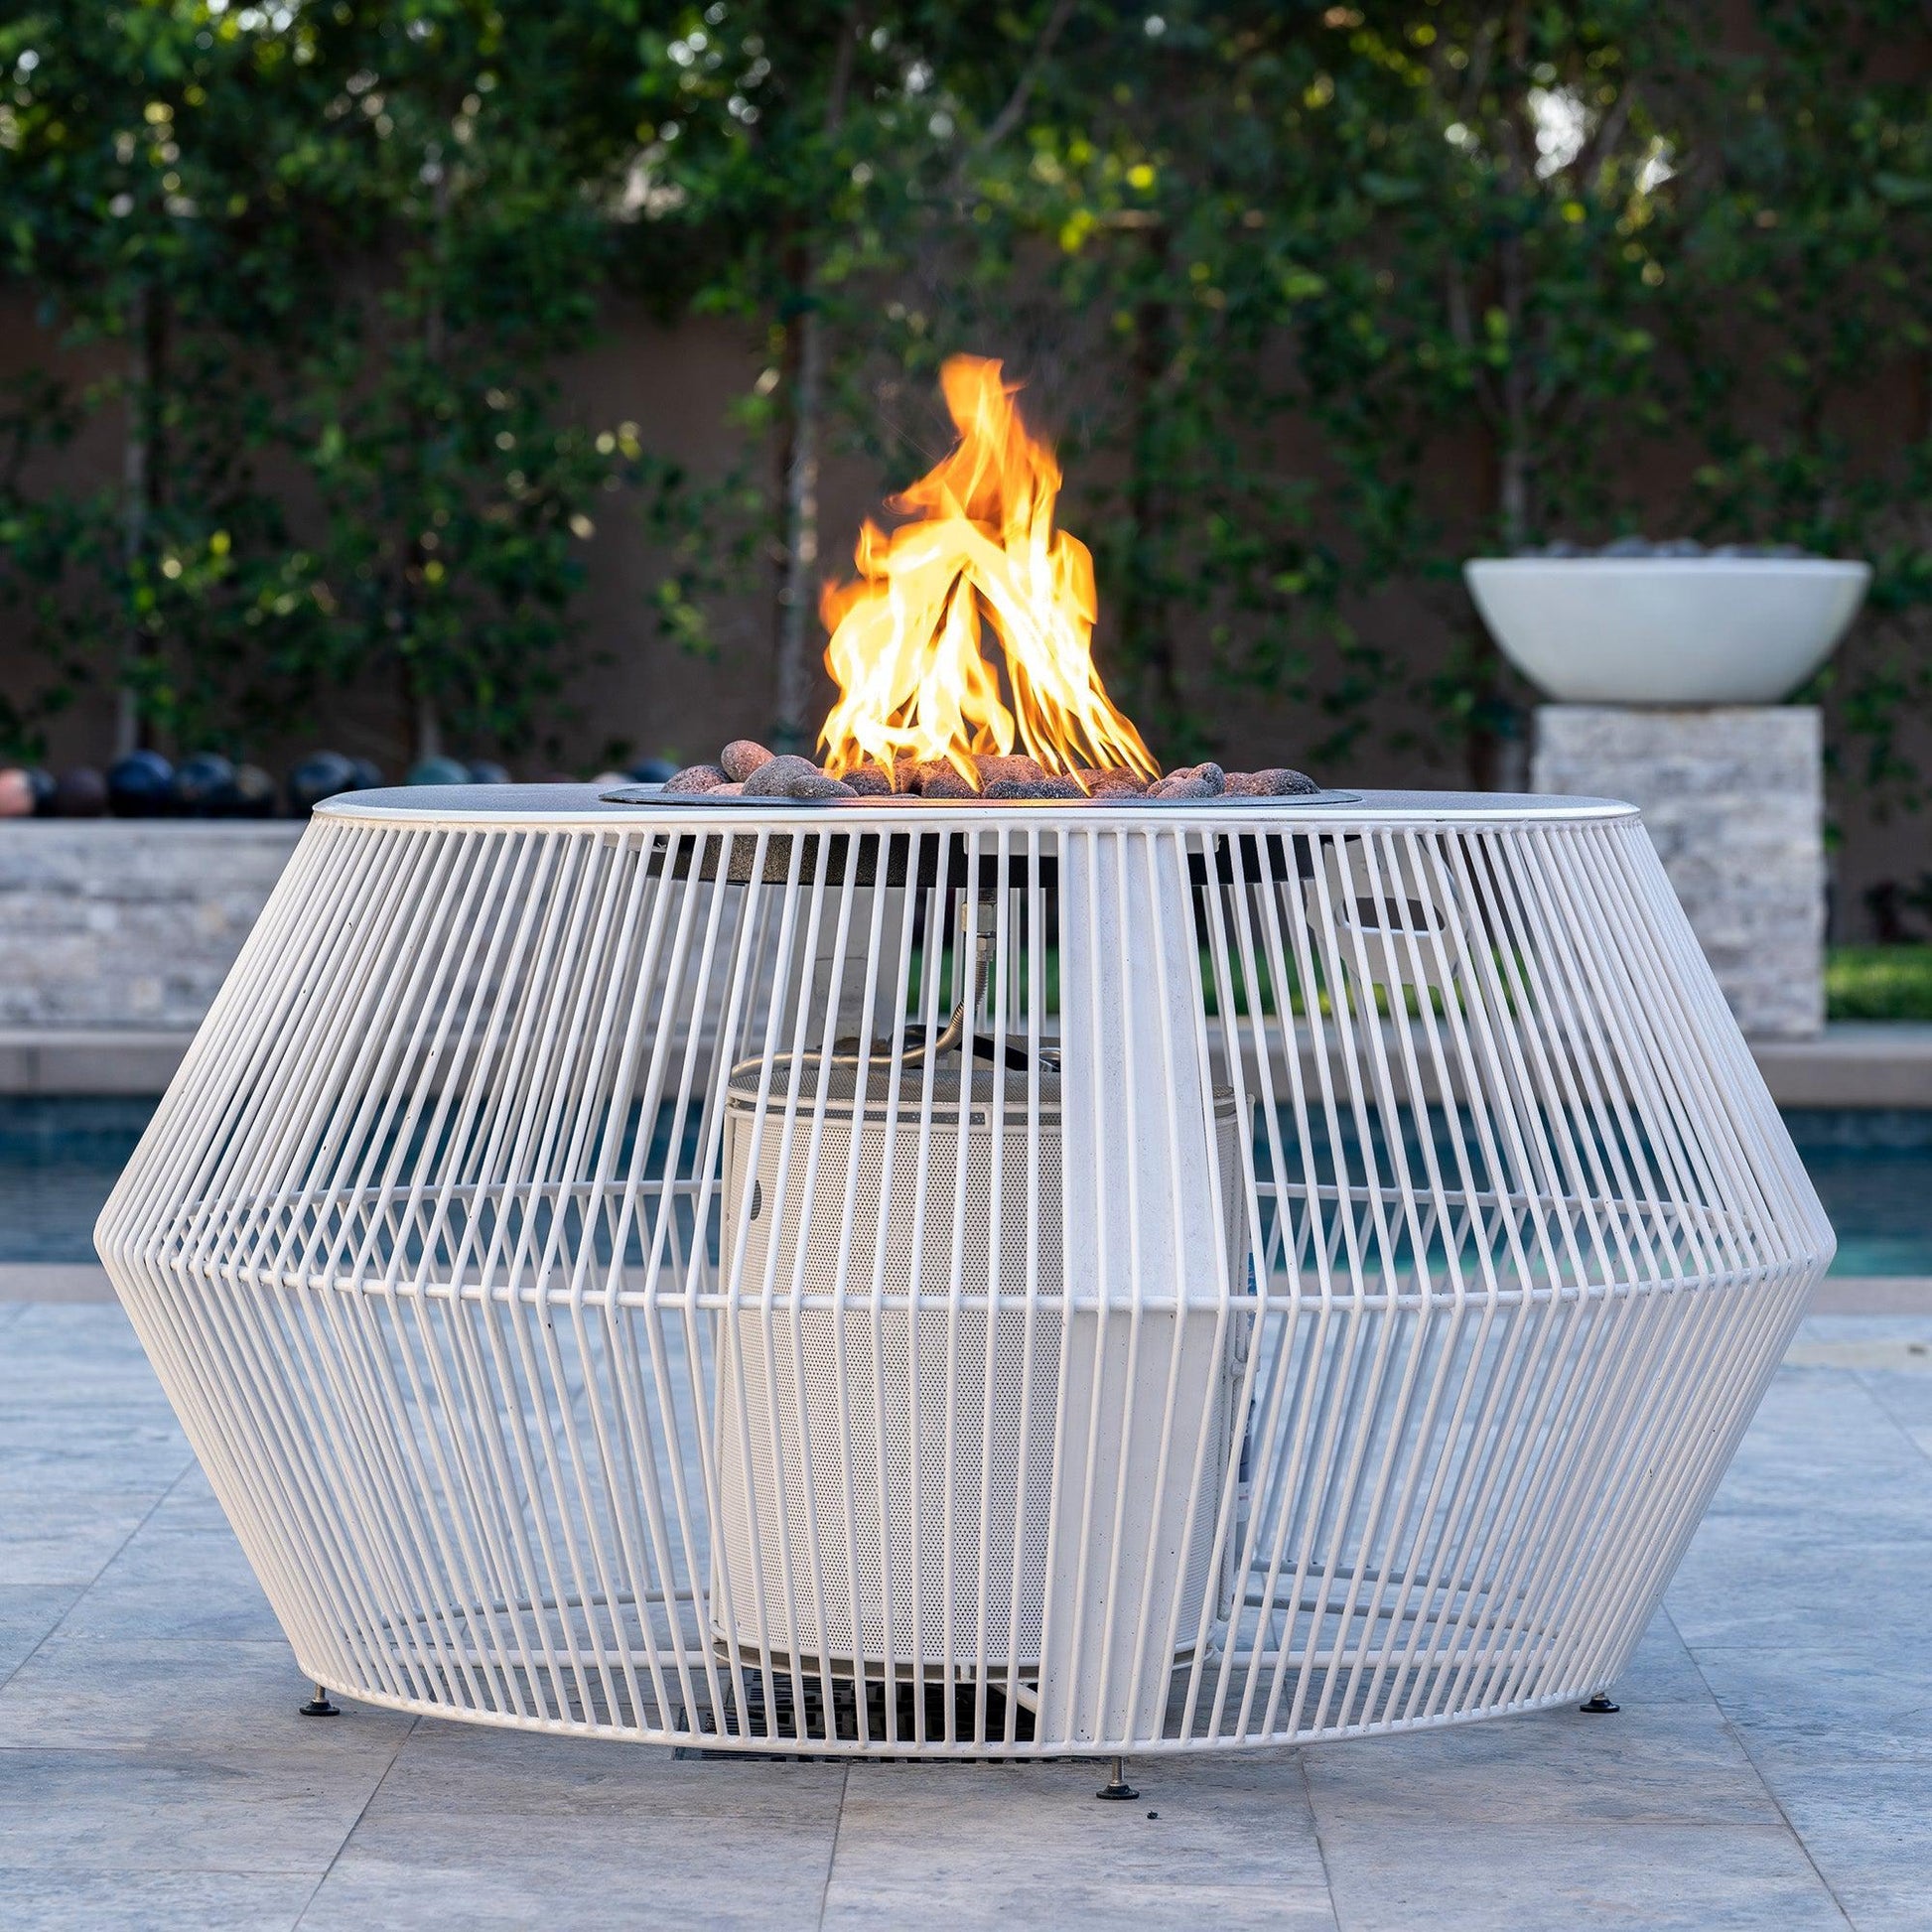 The Outdoor Plus Round Cesto 48" Powder Coated Liquid Propane Fire Pit with Flame Sense with Spark Ignition